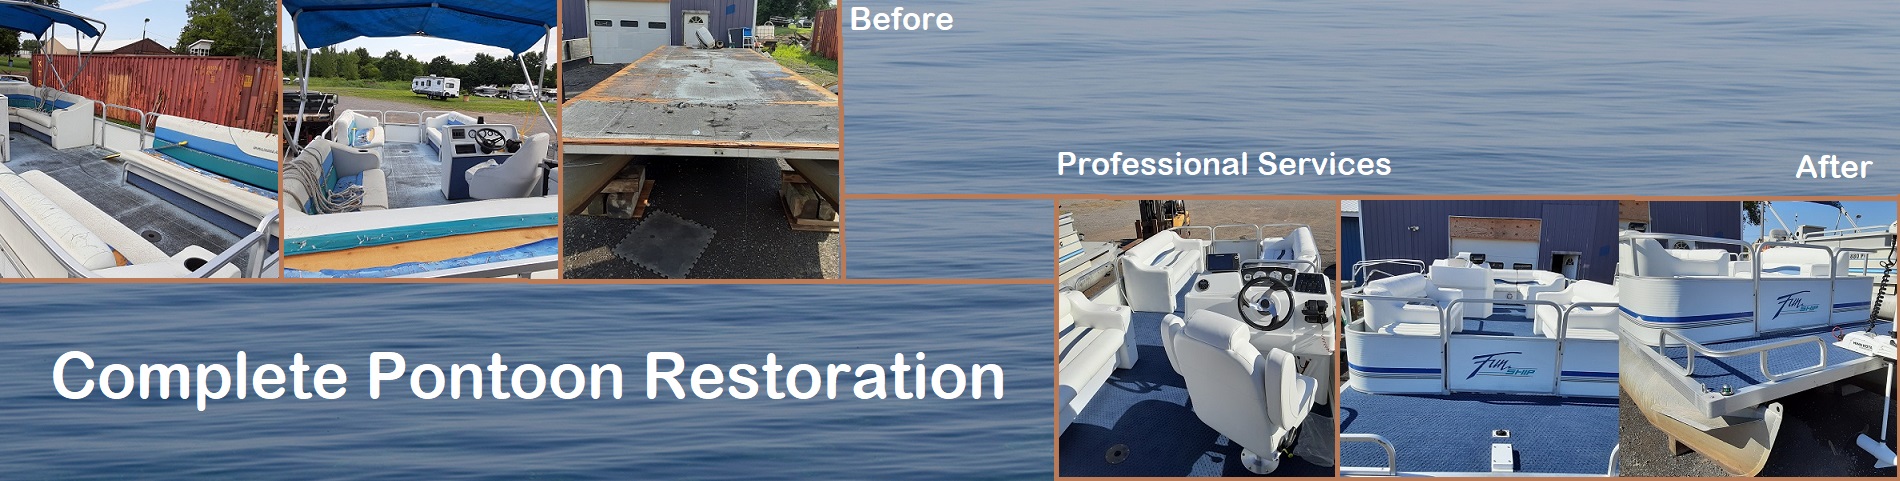 Image of a pontoon resteration before and after.